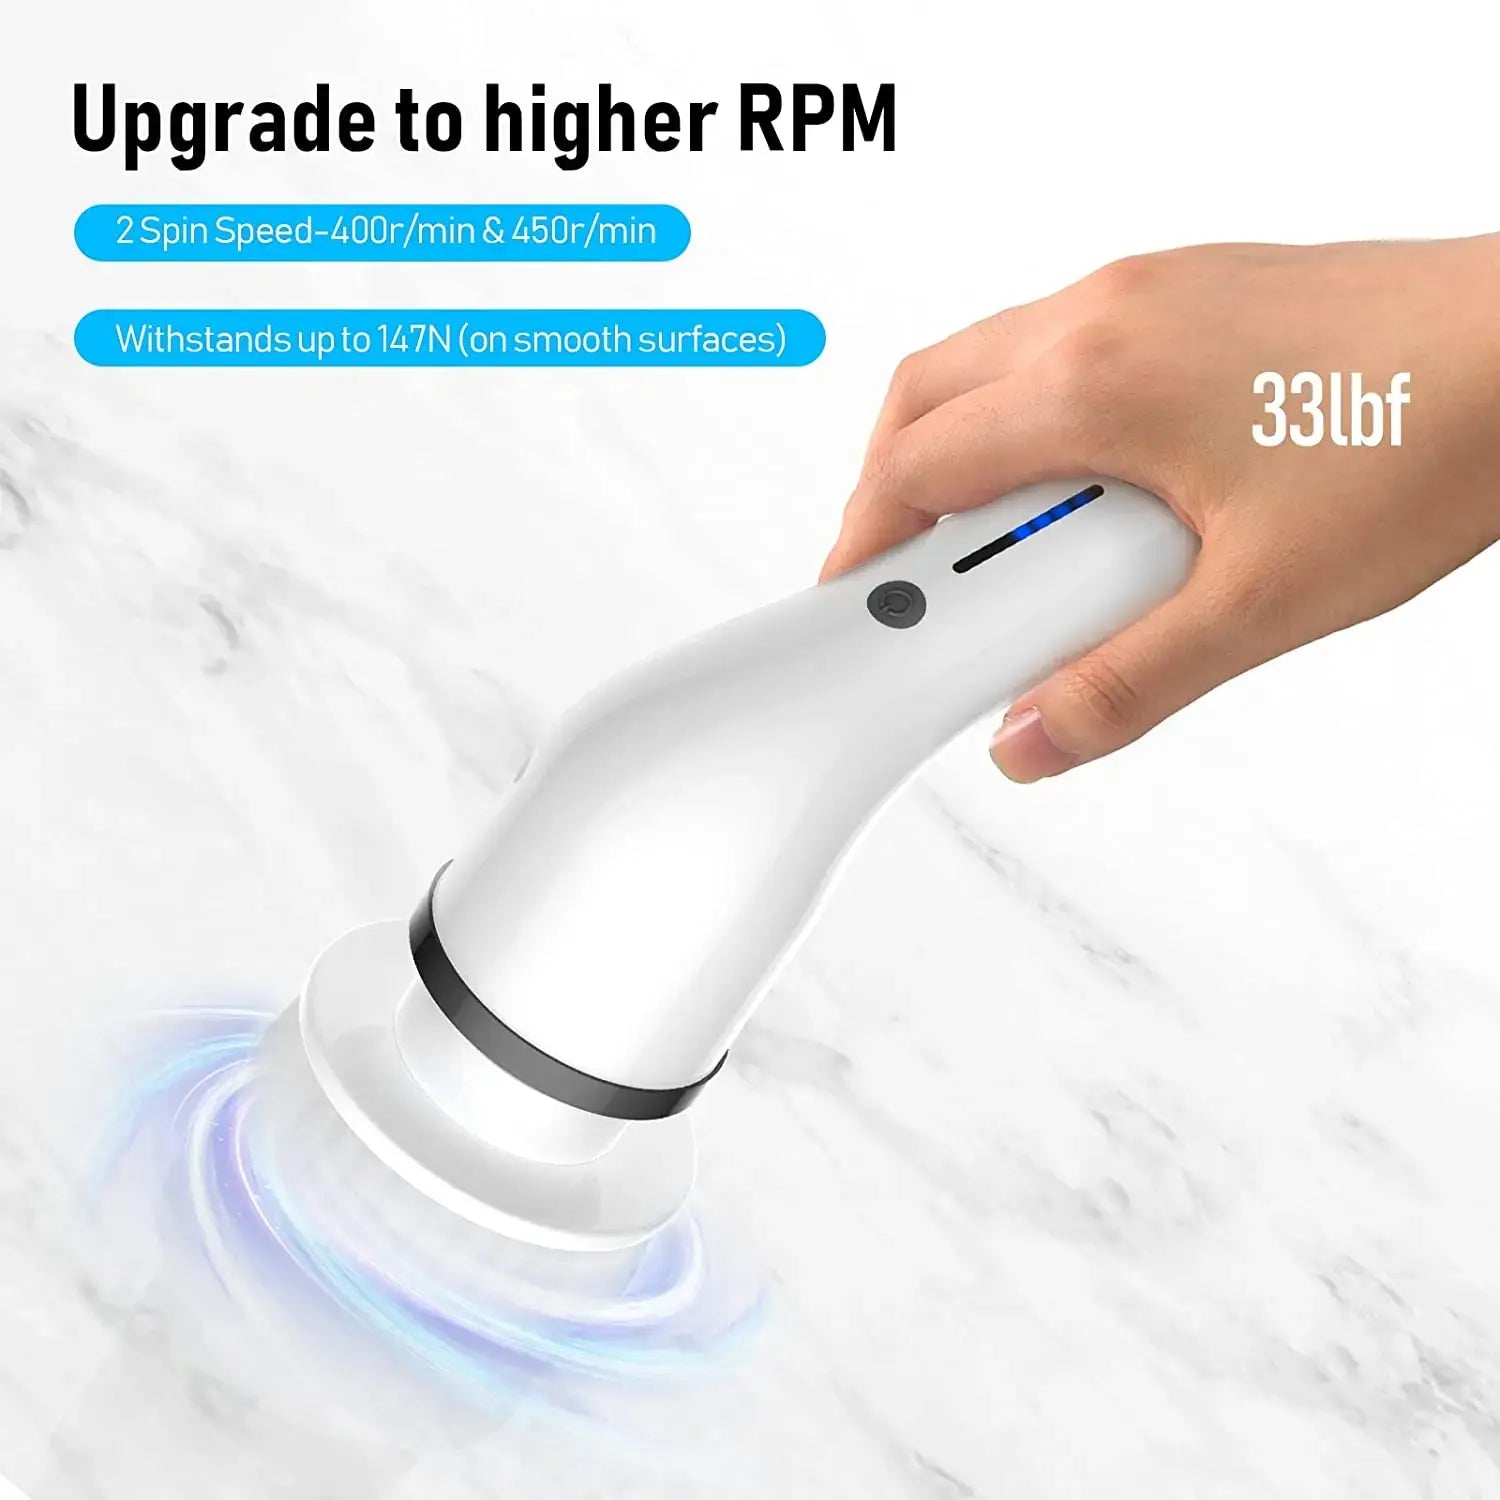 8-in-1 USB Electric Cleaning Brush